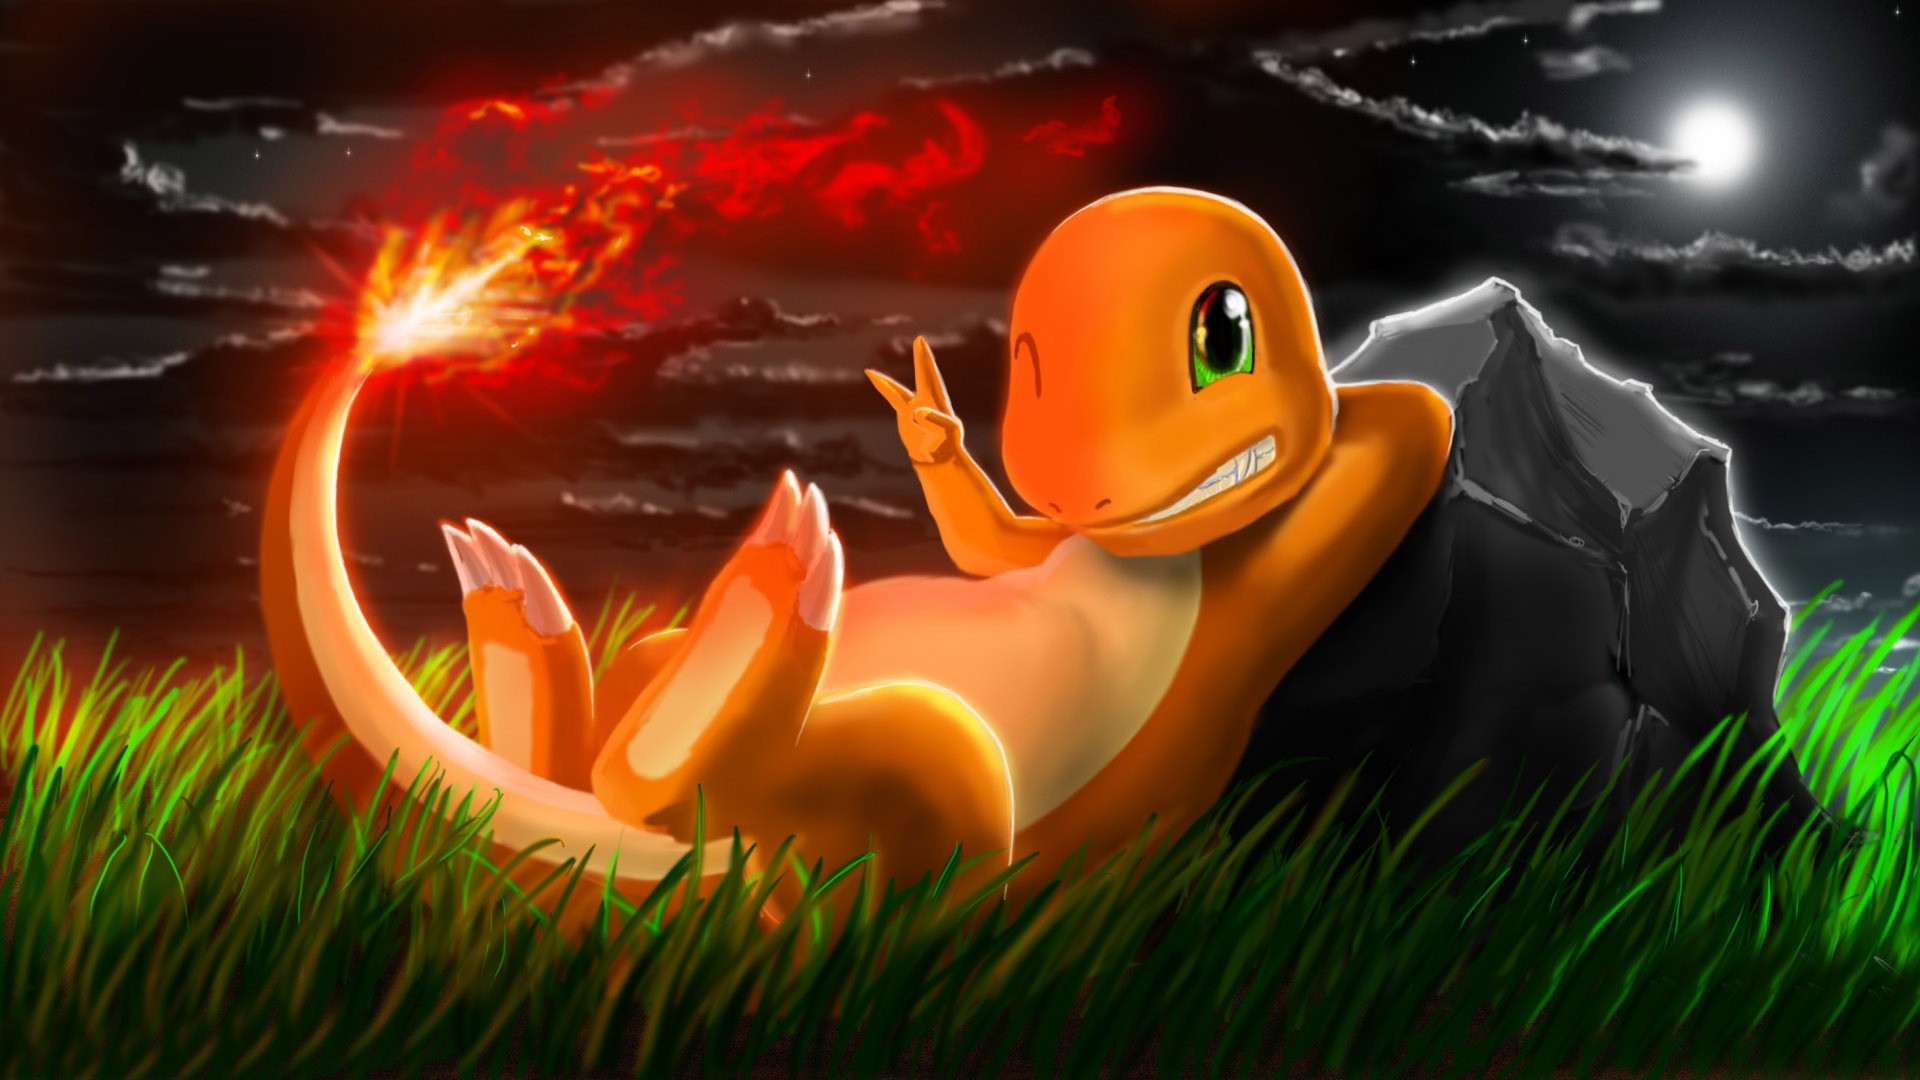 Free download Charmander Pokemon wallpaper 10075 [1920x1080] for your